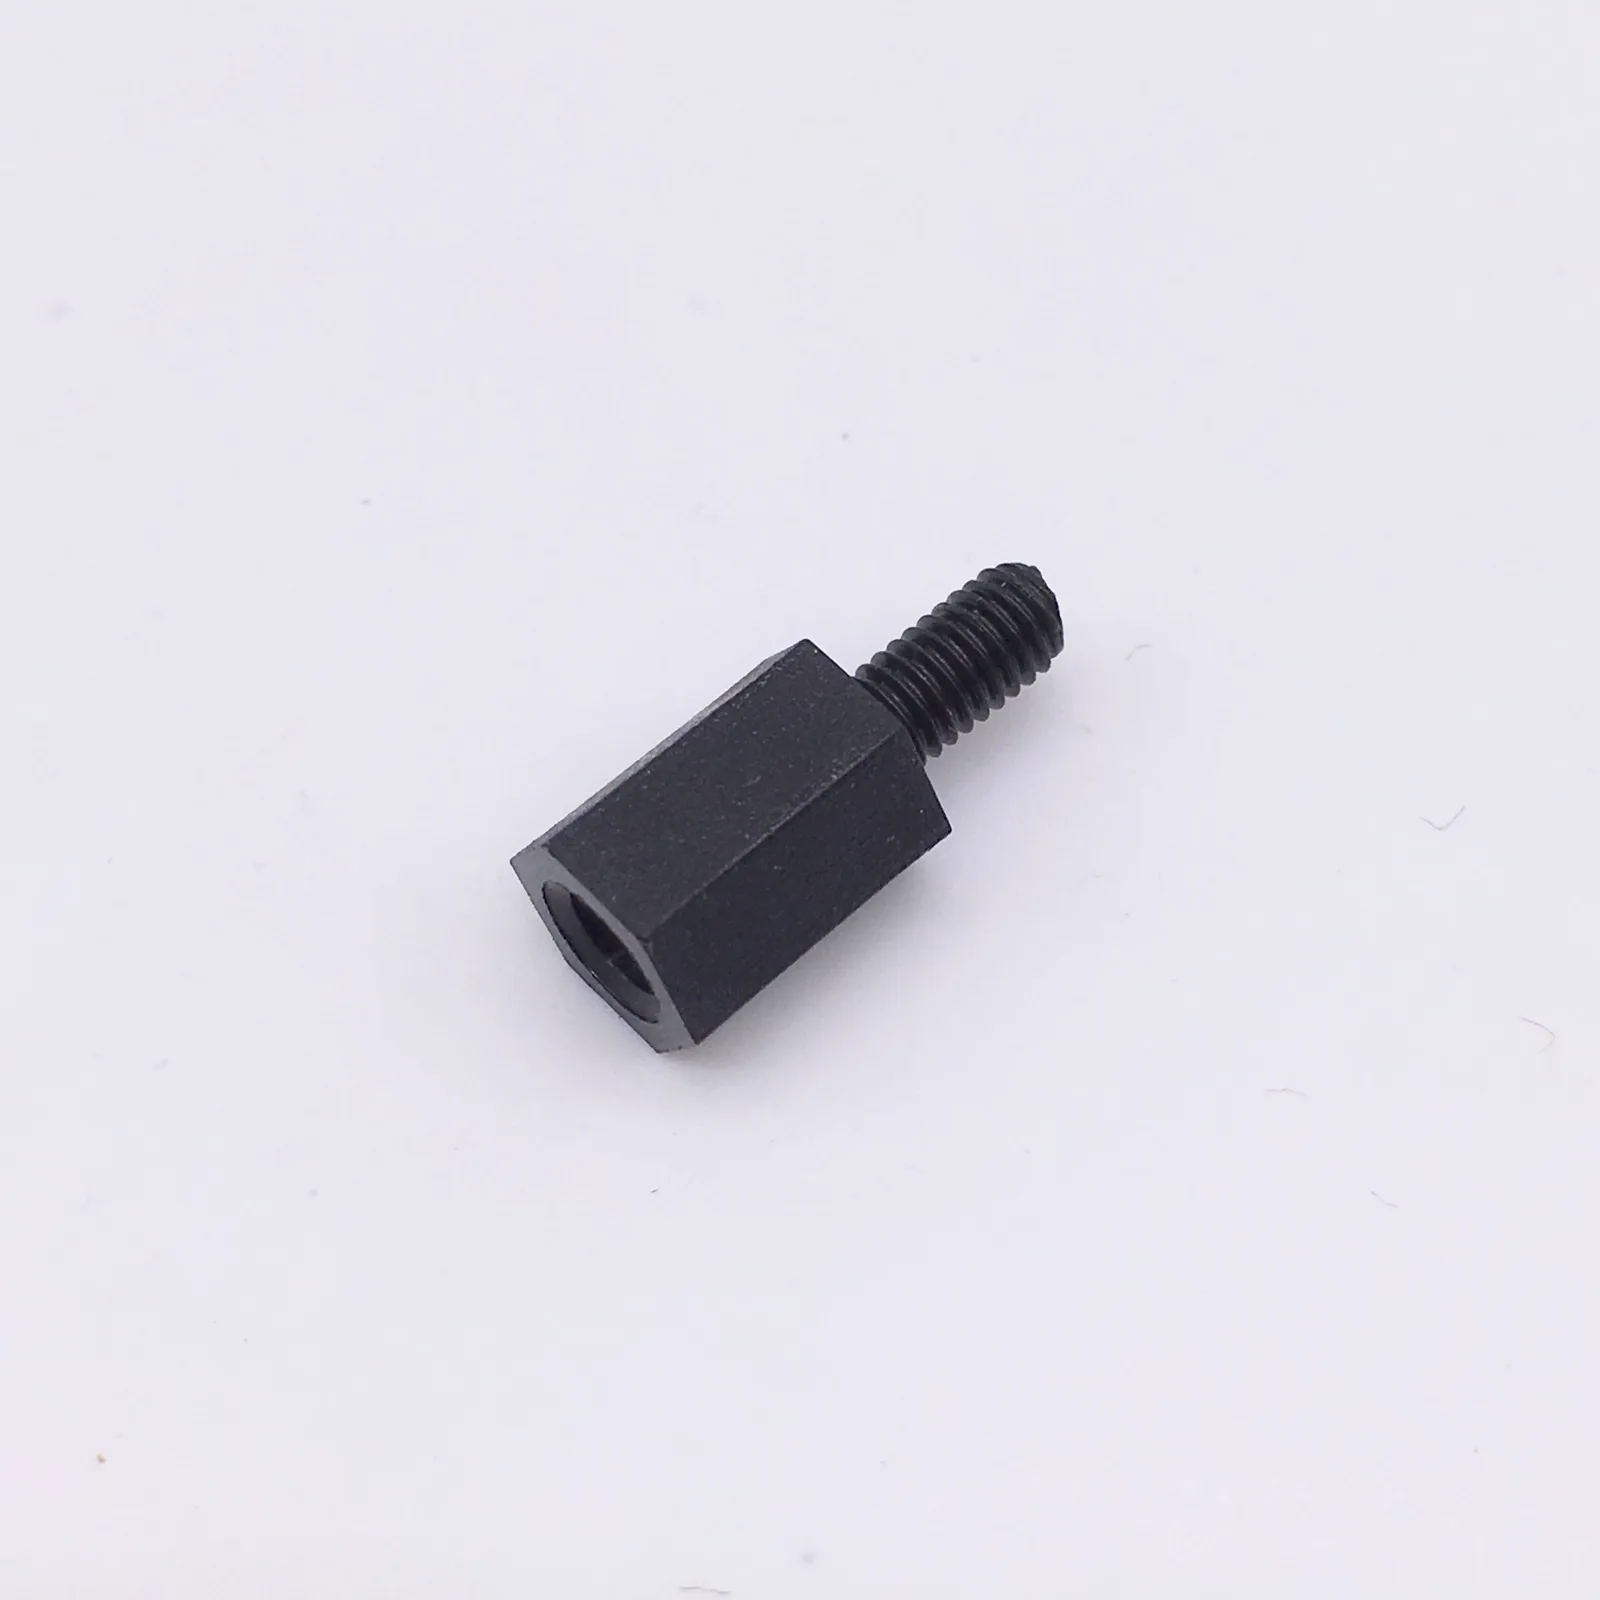 

M3x14+6 Spacer Screws Hex Standoff Nuts Male to Female Plastic Nylon Accessories Black Pack 100